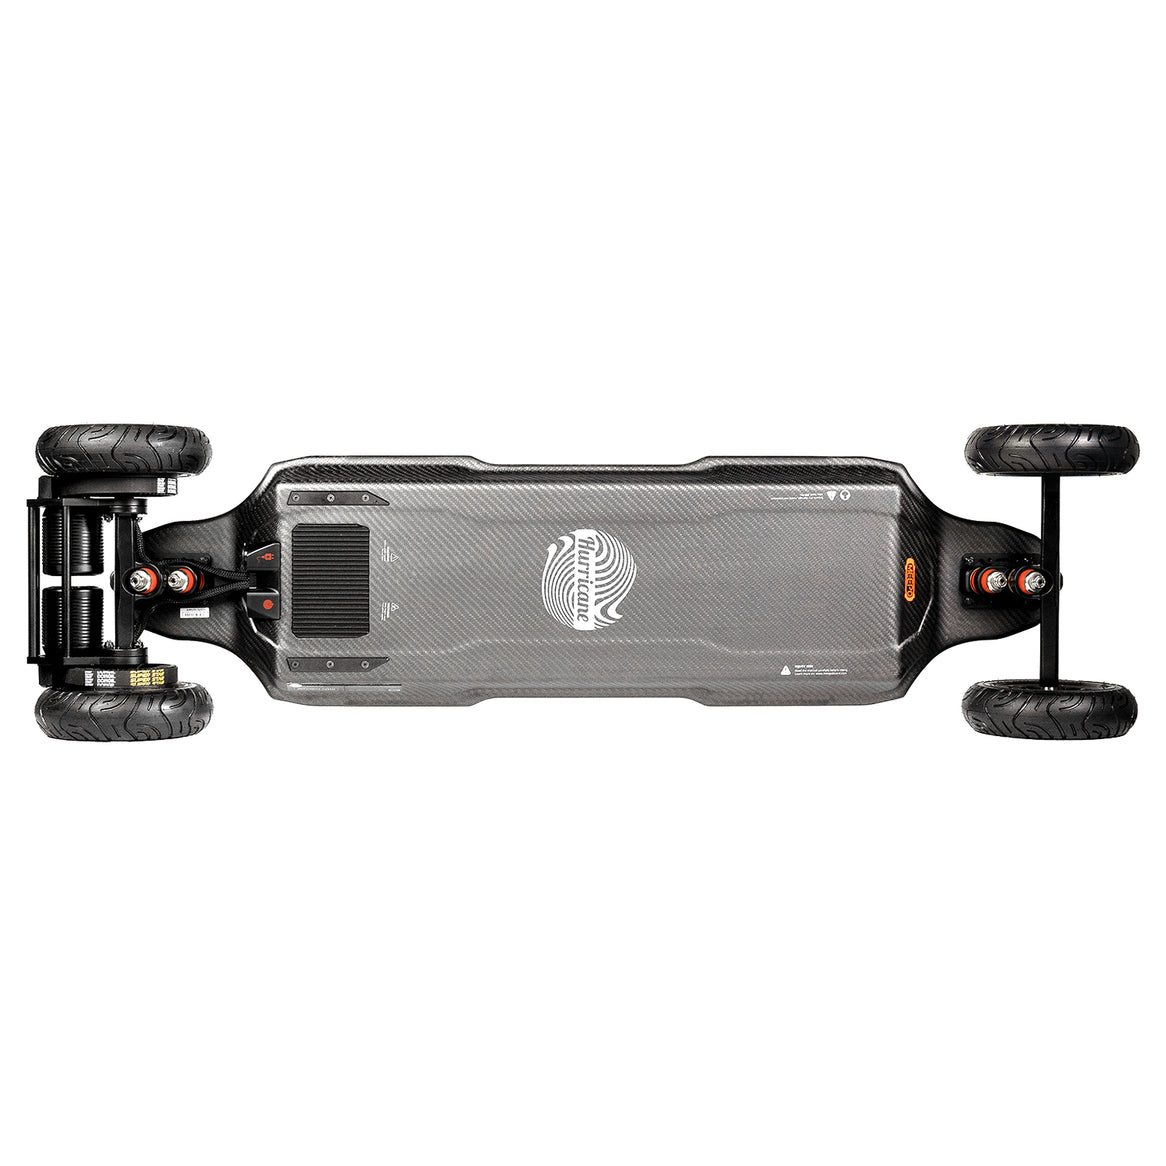 MEEPO Vader - Hurricane Carbon-limited edition